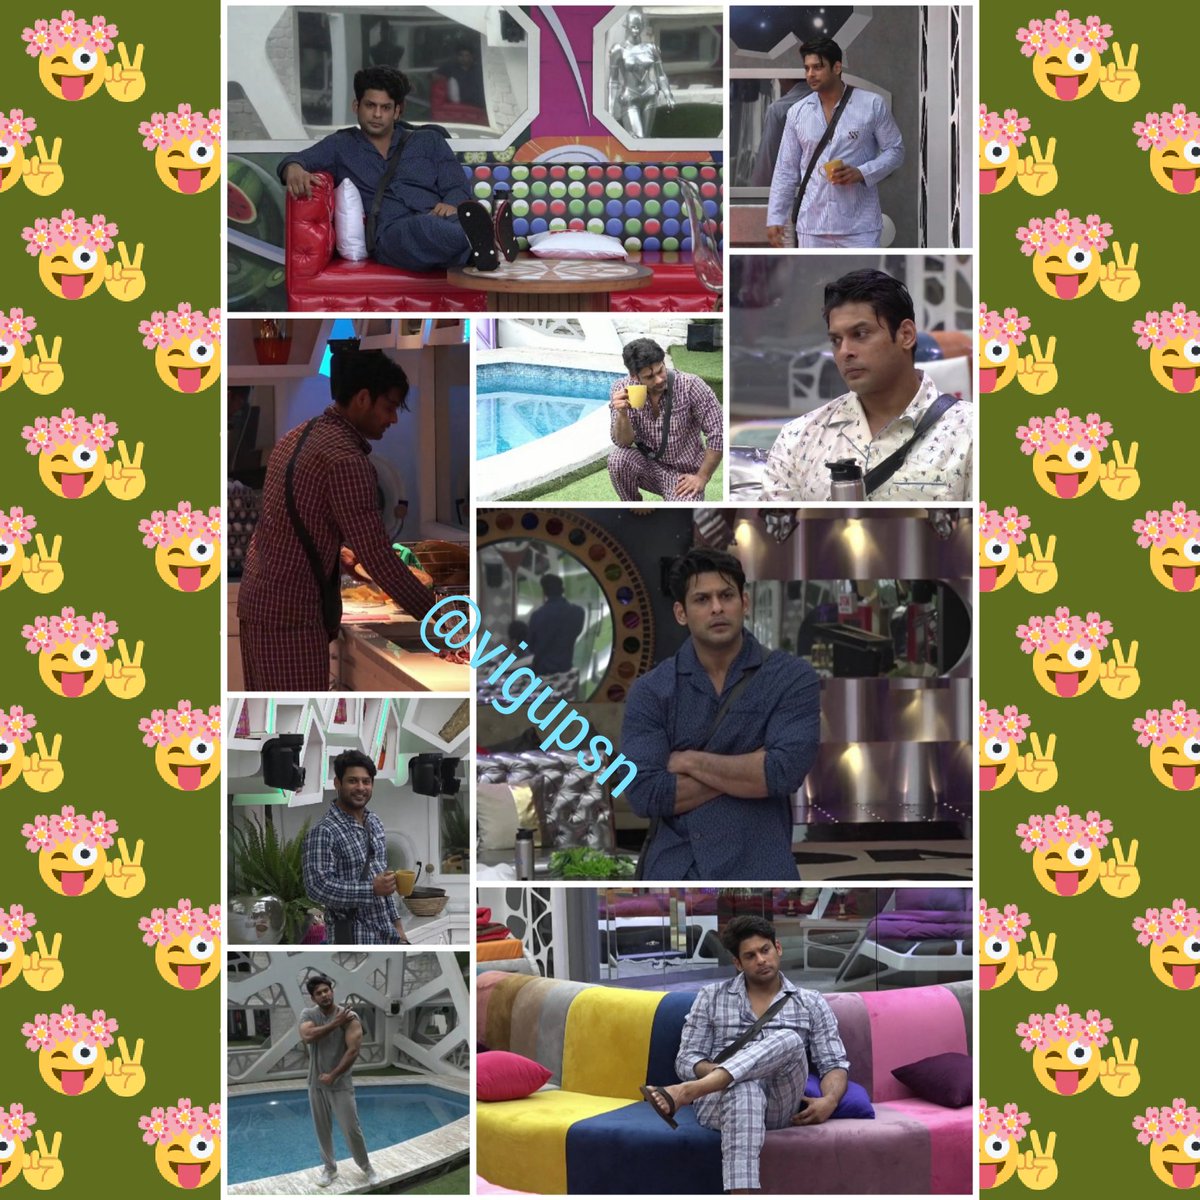 This time 1 interesting n a cute thing 2 watch was ur  @sidharth_shukla wonderful set of night suits...They were so different that r eyes struck on d suits when u wud sleep r workout r cut veggies...It was an ab scene paltega momentBb13 - grey shortsBB14 - night suit2/n